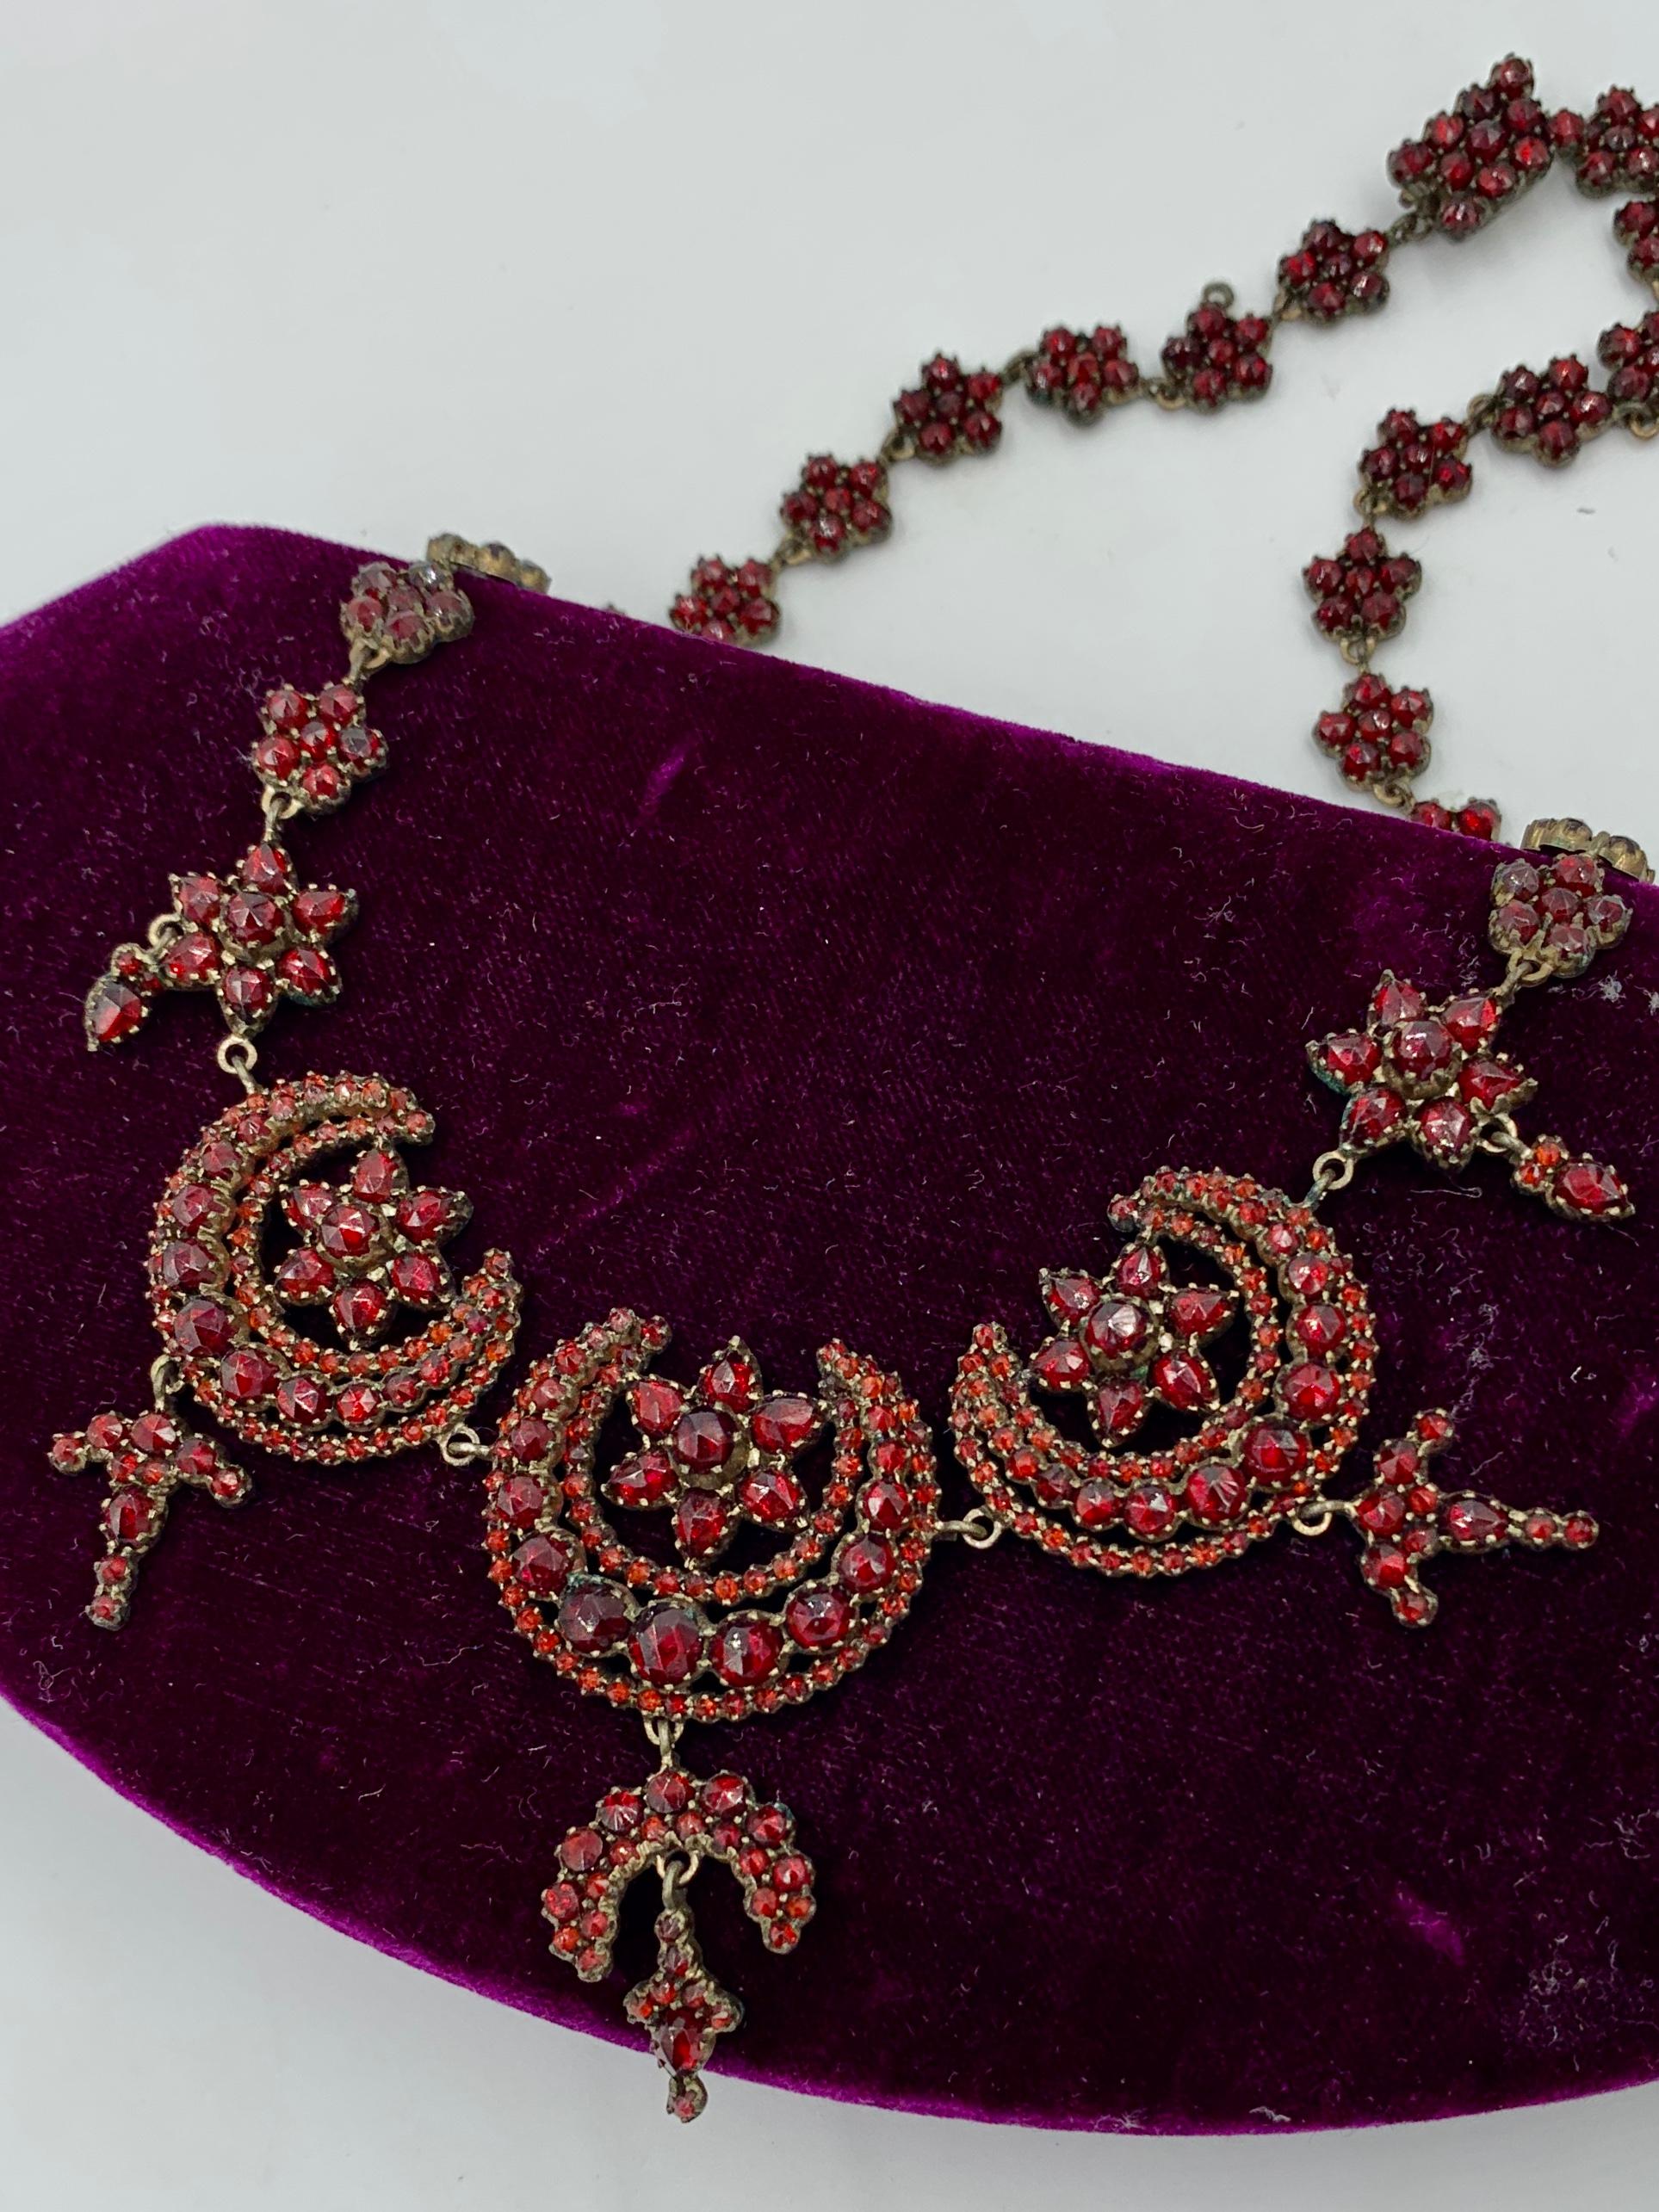 One of the finest Victorian Bohemian Garnet Parure with Necklace, Bracelet and Earrings that we have ever seen. The Garnet Necklace is a masterpiece of Victorian Garnet Jewelry.  It has Star and Moon center medallions with very deep garnets of the